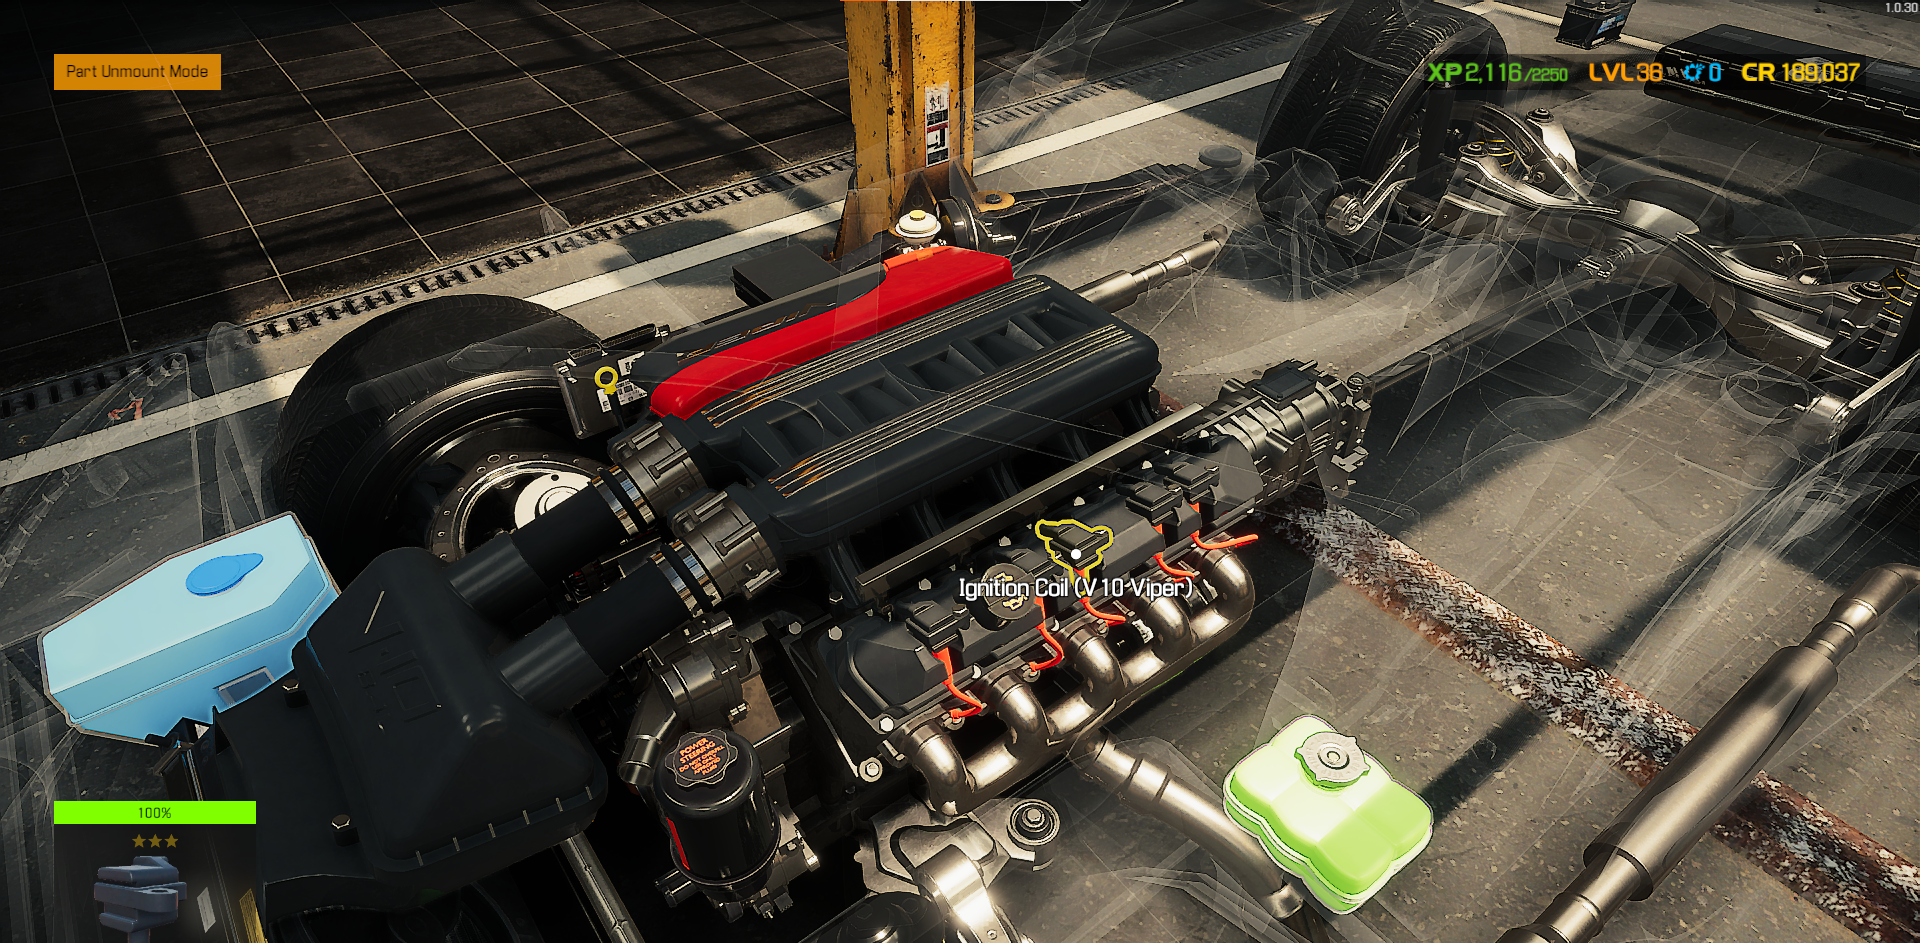 A screenshot of one of the Ignition Coils of a Dodge Viper V10 engine in Car Mechanic Simulator. 